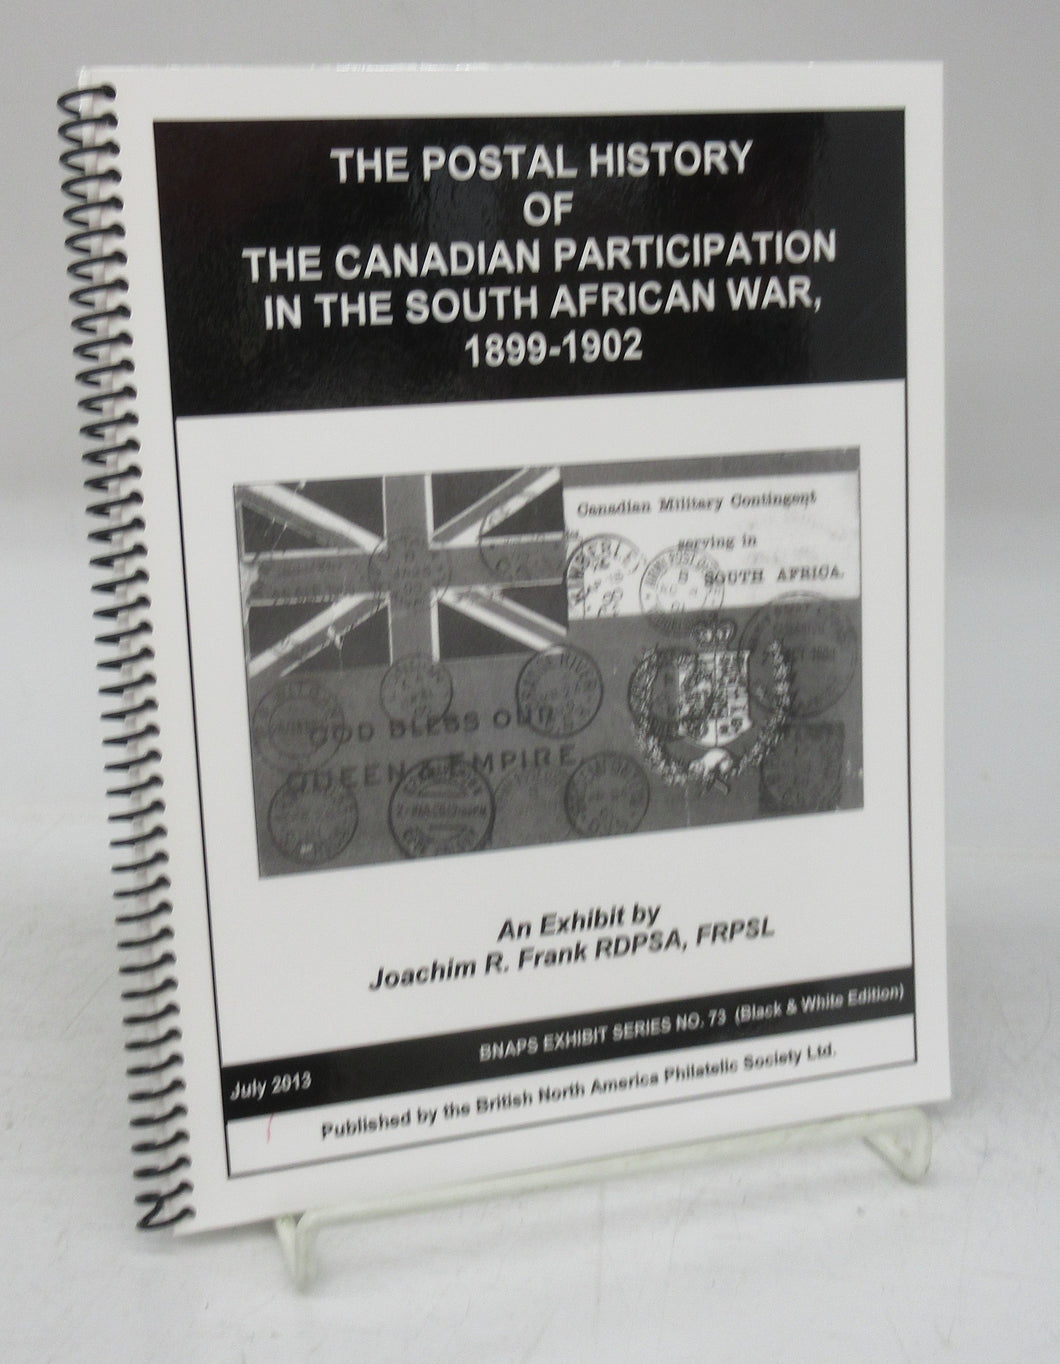 The Postal History of the Canadian Participation in the South African War, 1899-1902